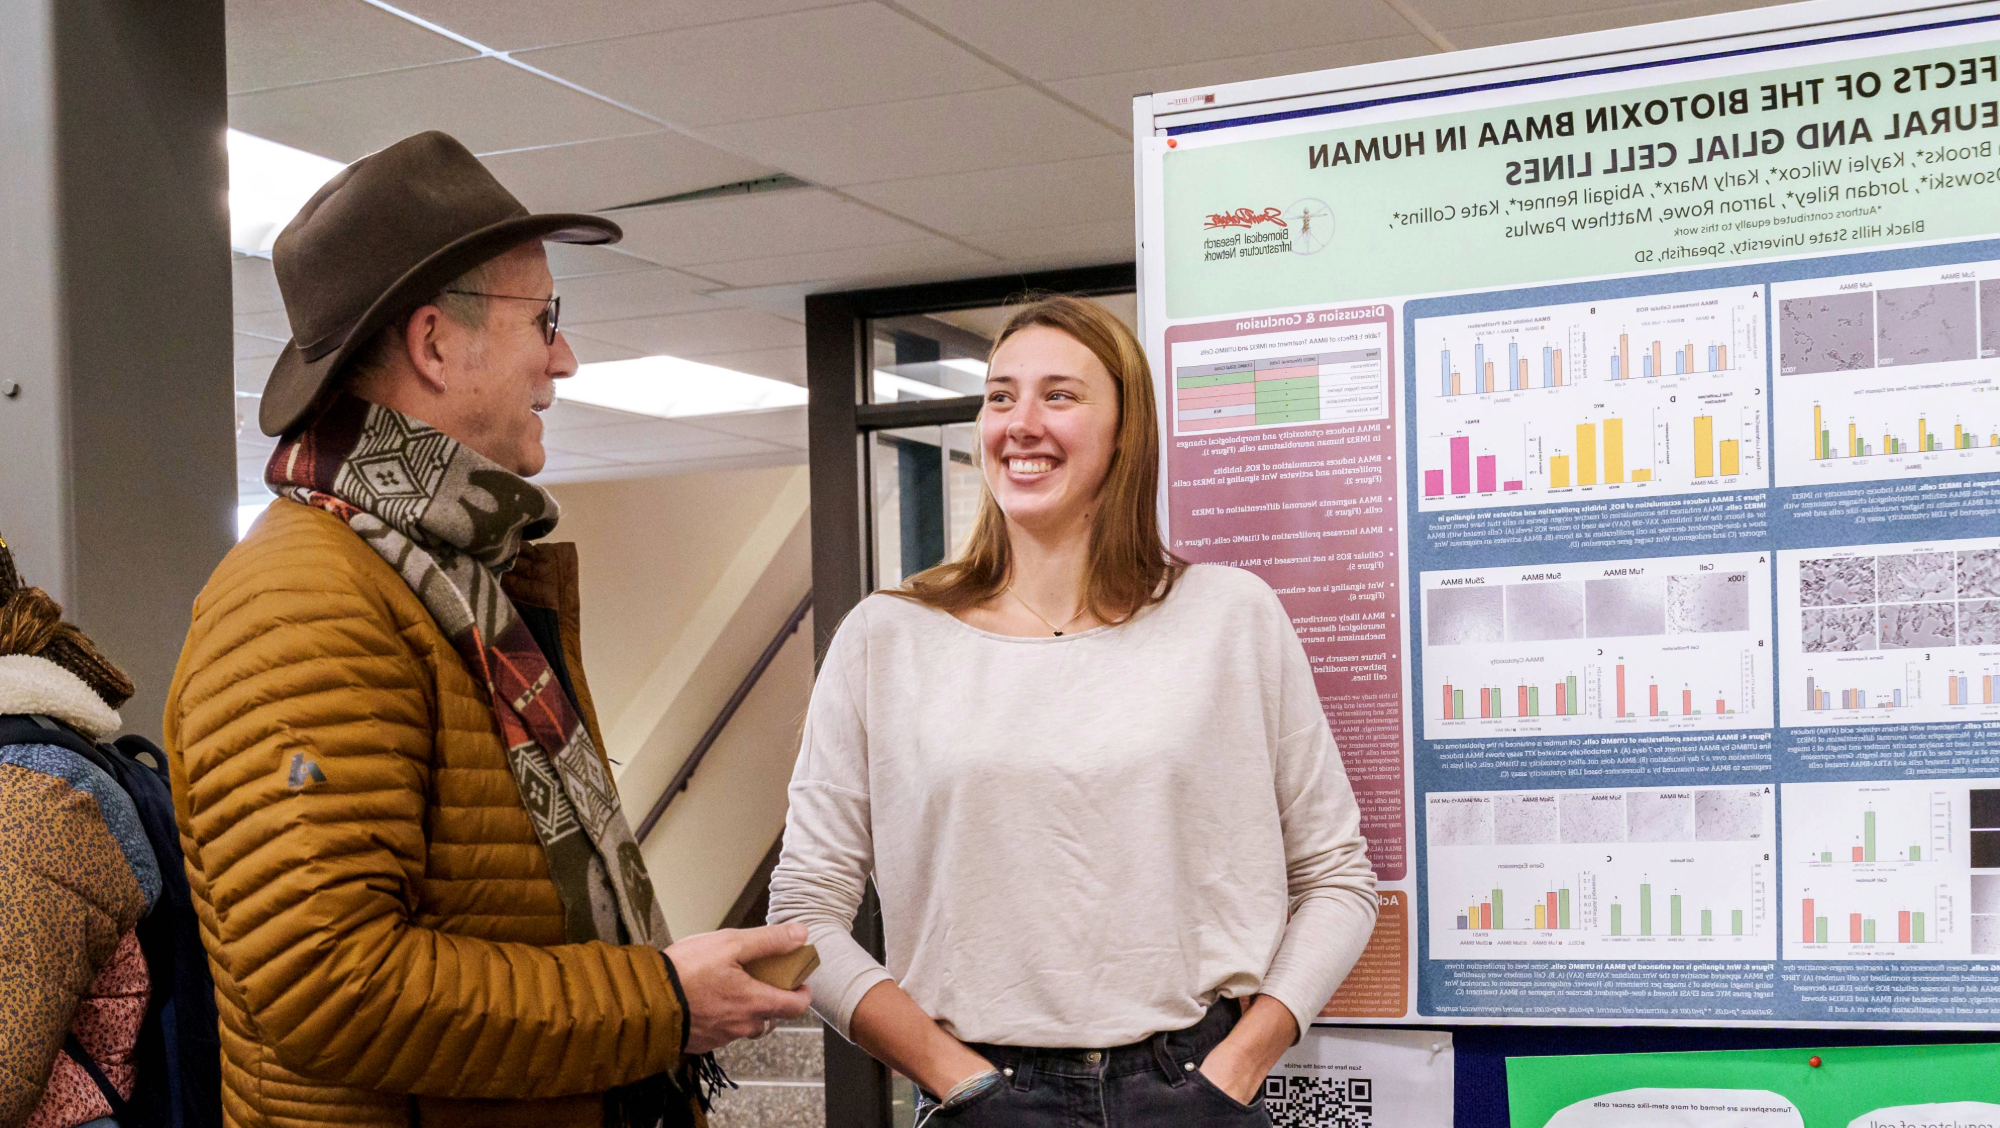 Research poster presentations at BHRS